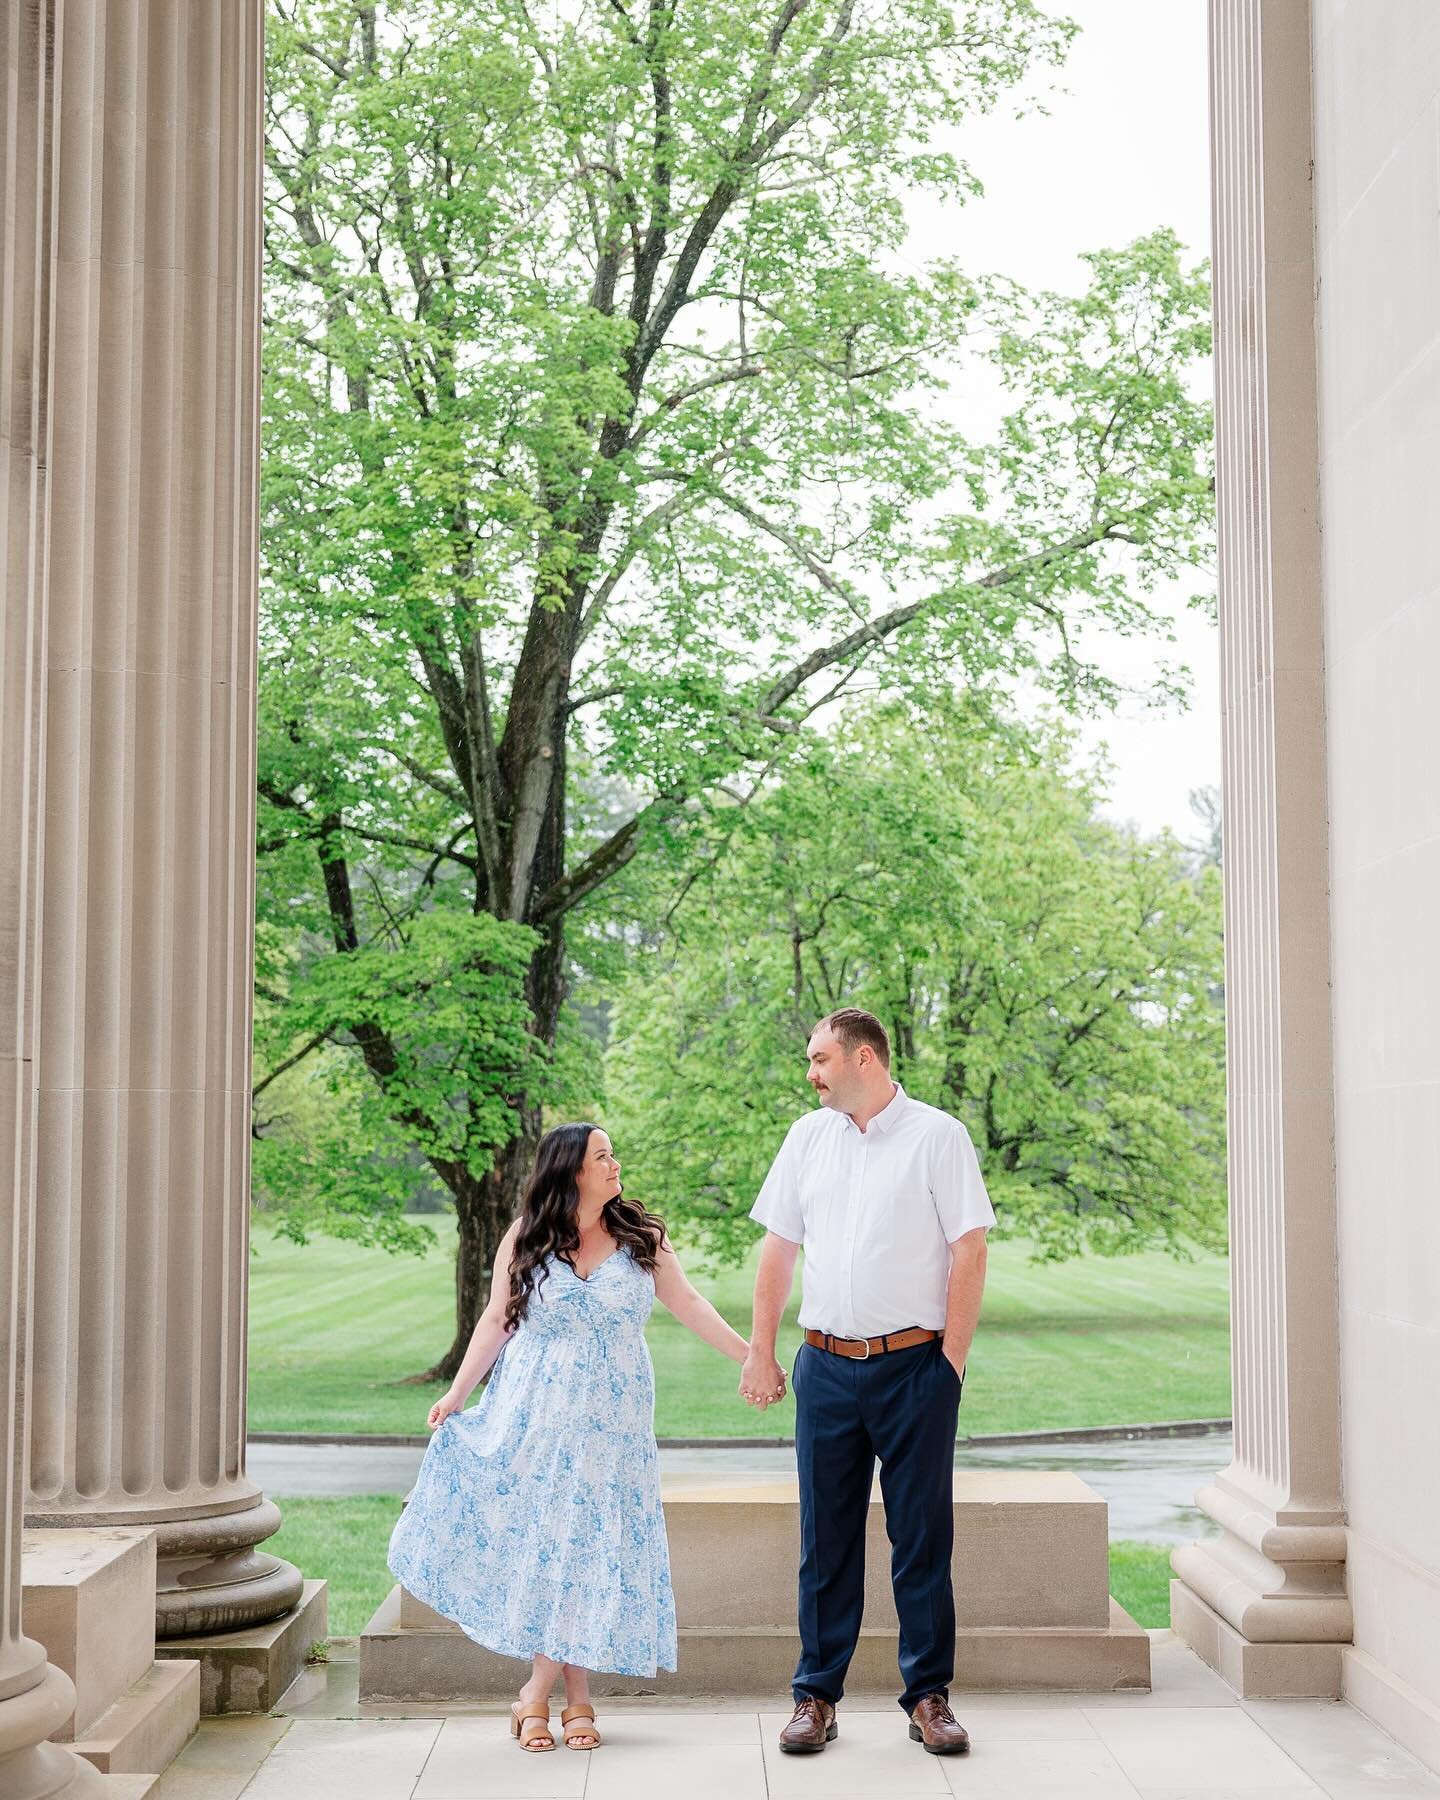 An engagement session on a rainy, spring day? Yes please! Tara and Tommy booked their session months ago and decided to roll with the weather and honestly it was the best decision. We had lush green gardens, no crowds; clear umbrellas and a gorgeous 